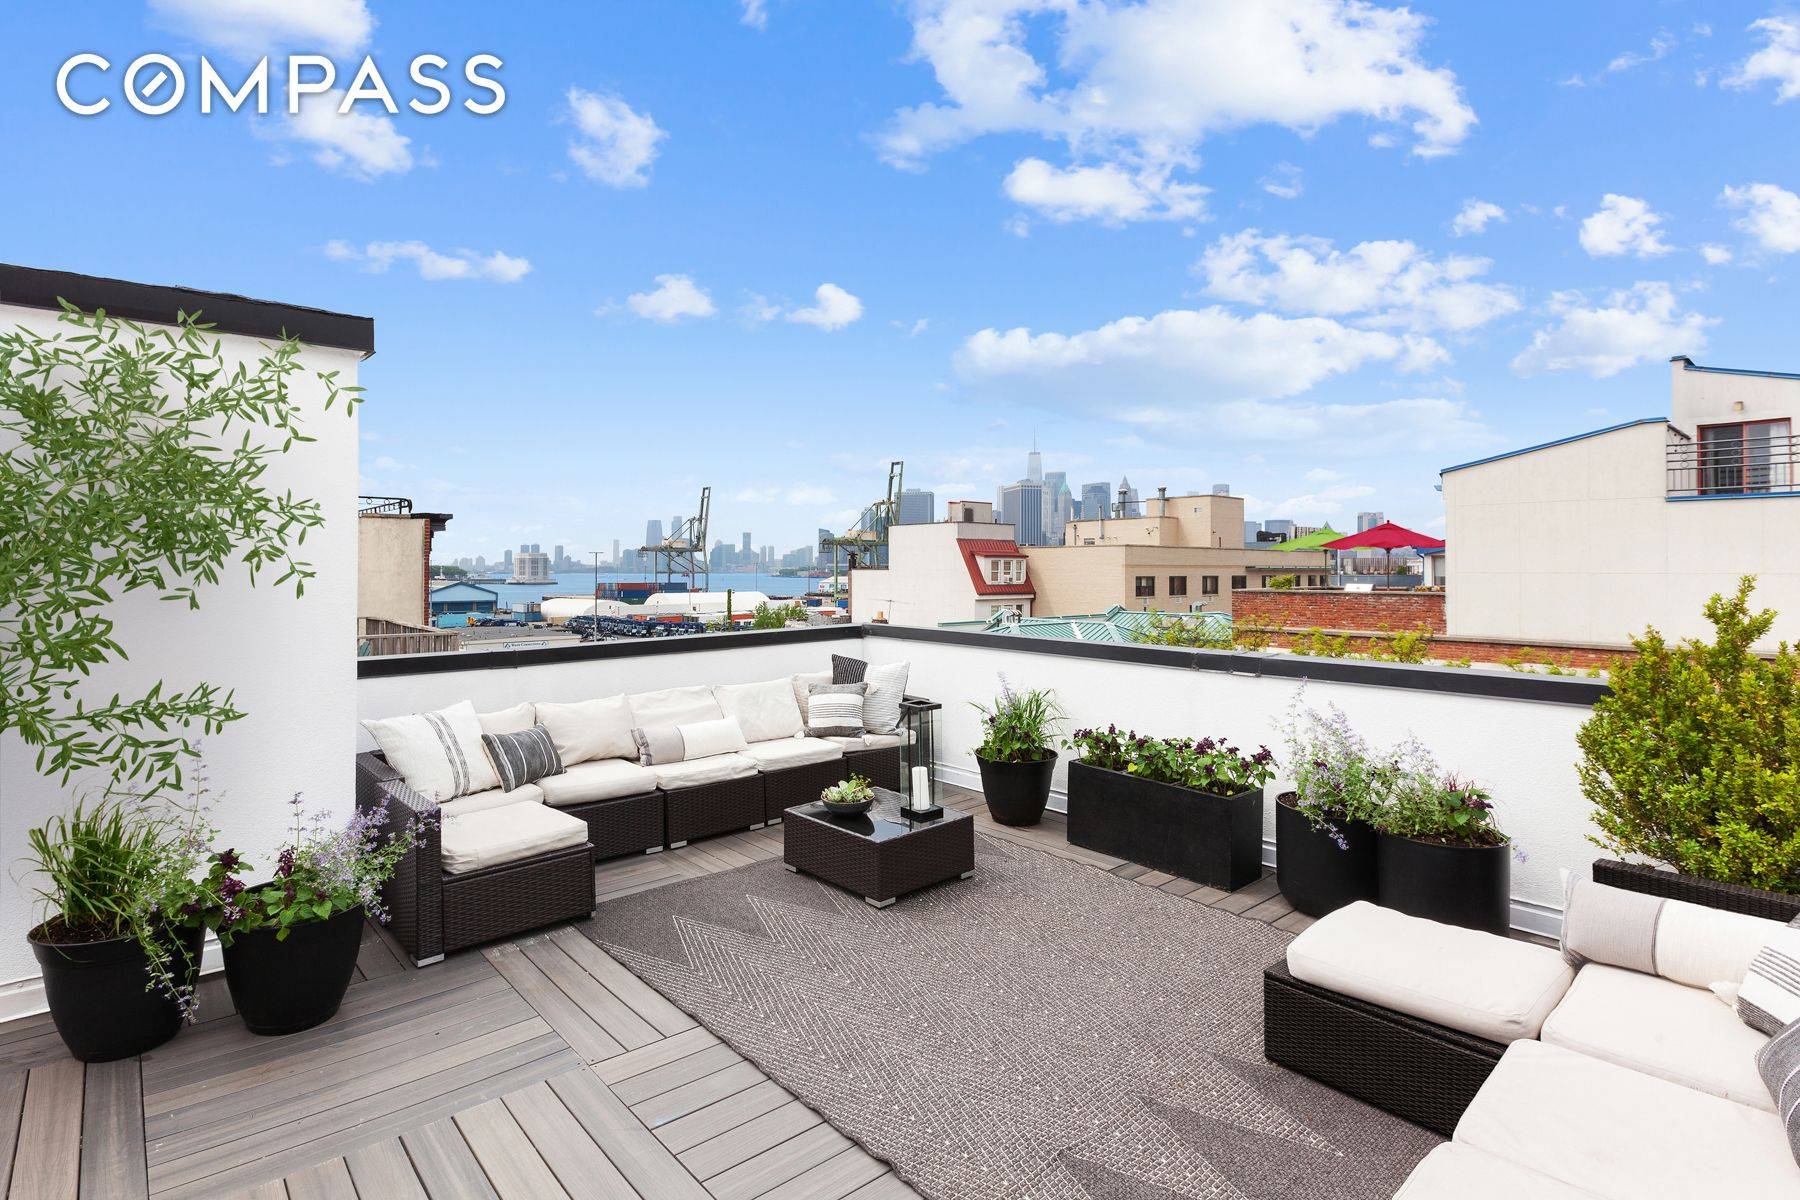 WATERFRONT, PENTHOUSE where PRIVATE OUTDOOR SPACE abound in this generous 2100ft combined 2 bedroom, 2 full bath, modern, brownstone PH with a jaw dropping 1000sf private roof deck with cinematic ...